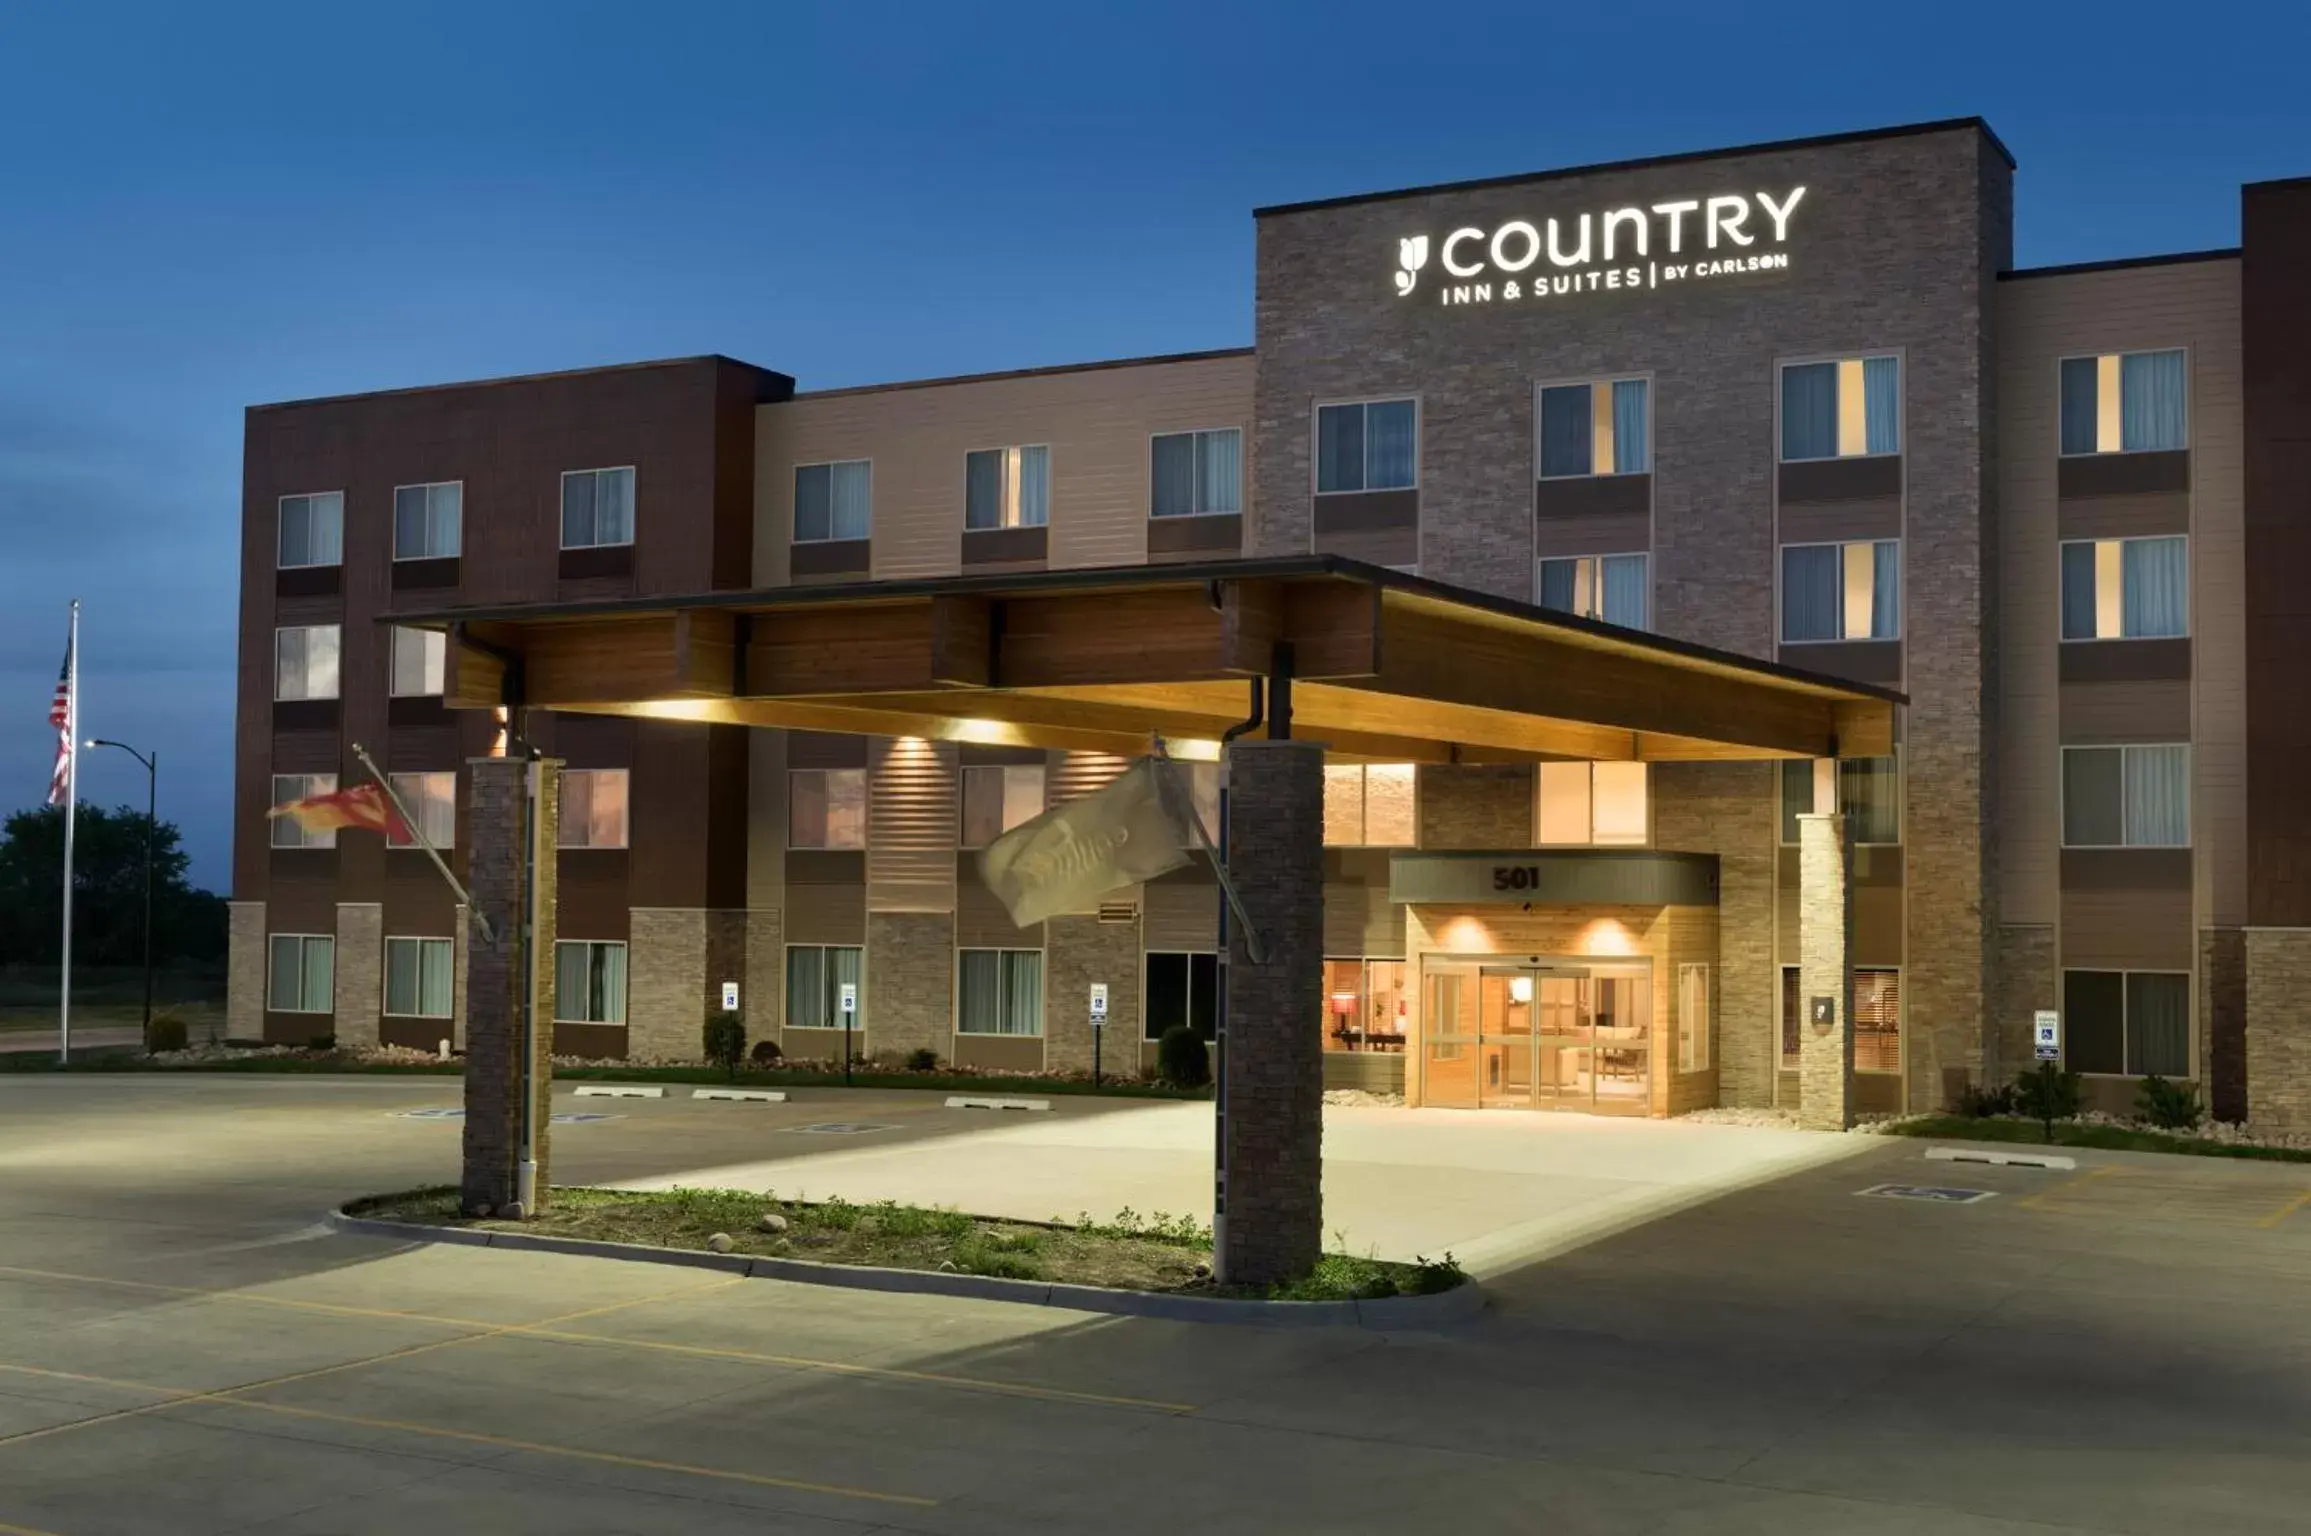 Facade/entrance, Property Building in Country Inn & Suites by Radisson, Indianola, IA